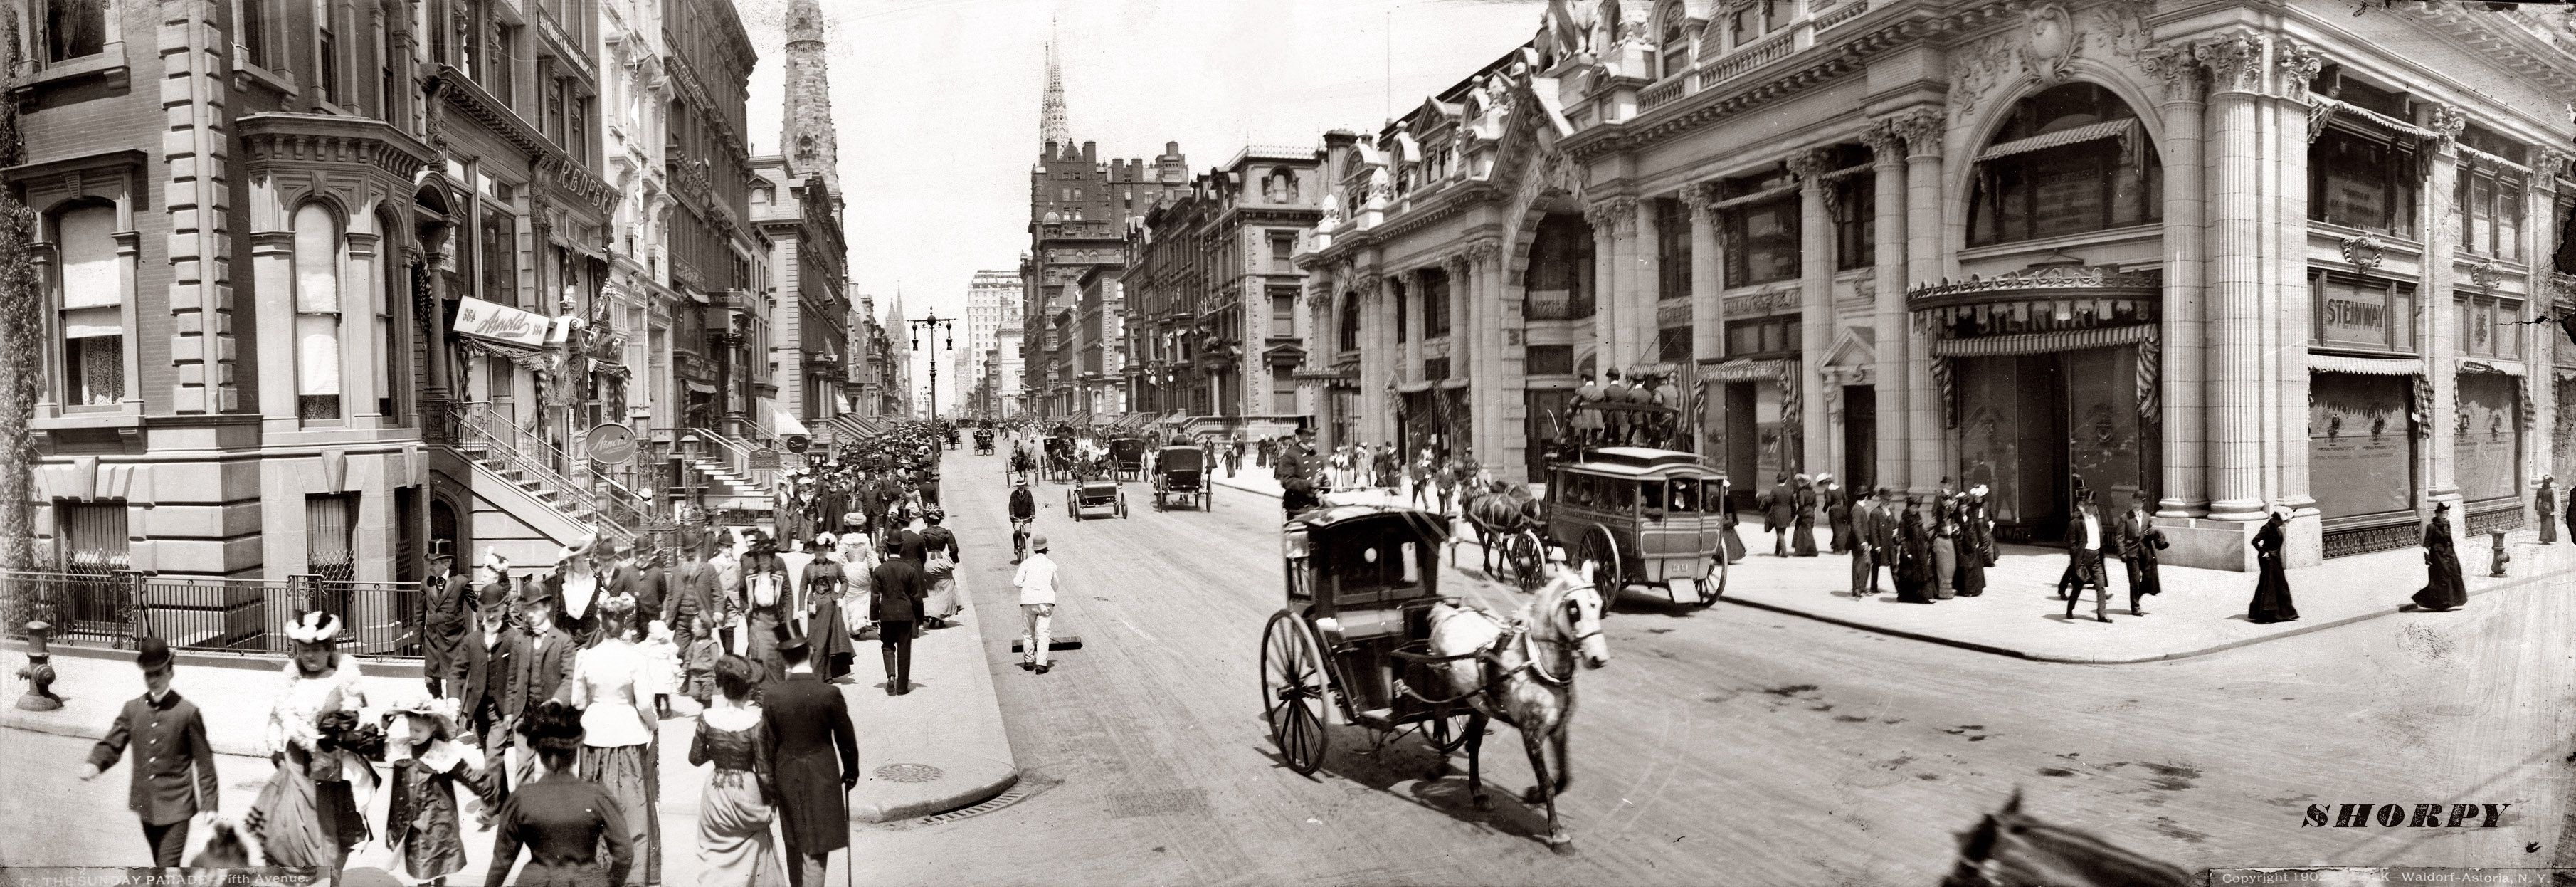 "The Sunday Parade, 5th Avenue." View north from 46th Street. Windsor Arcade (demolished 1921) on right. View [larger ] [way big]. 1902 photo by Benjamin Falk. Compare with the image below -- in 11 years, cars have taken over the street.